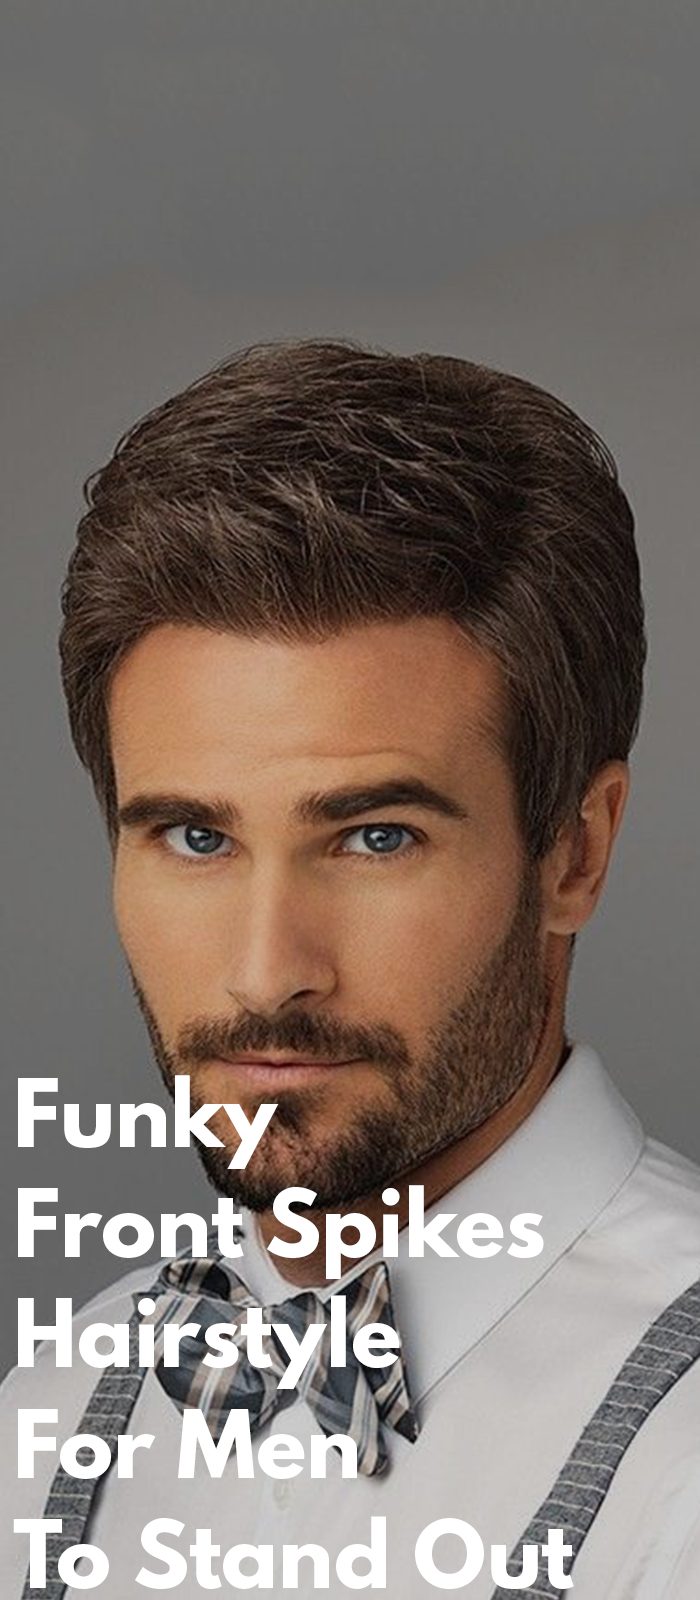 Funky Front Spikes Hairstyle For Men To Stand Out! ⋆ Best Fashion Blog For  Men 